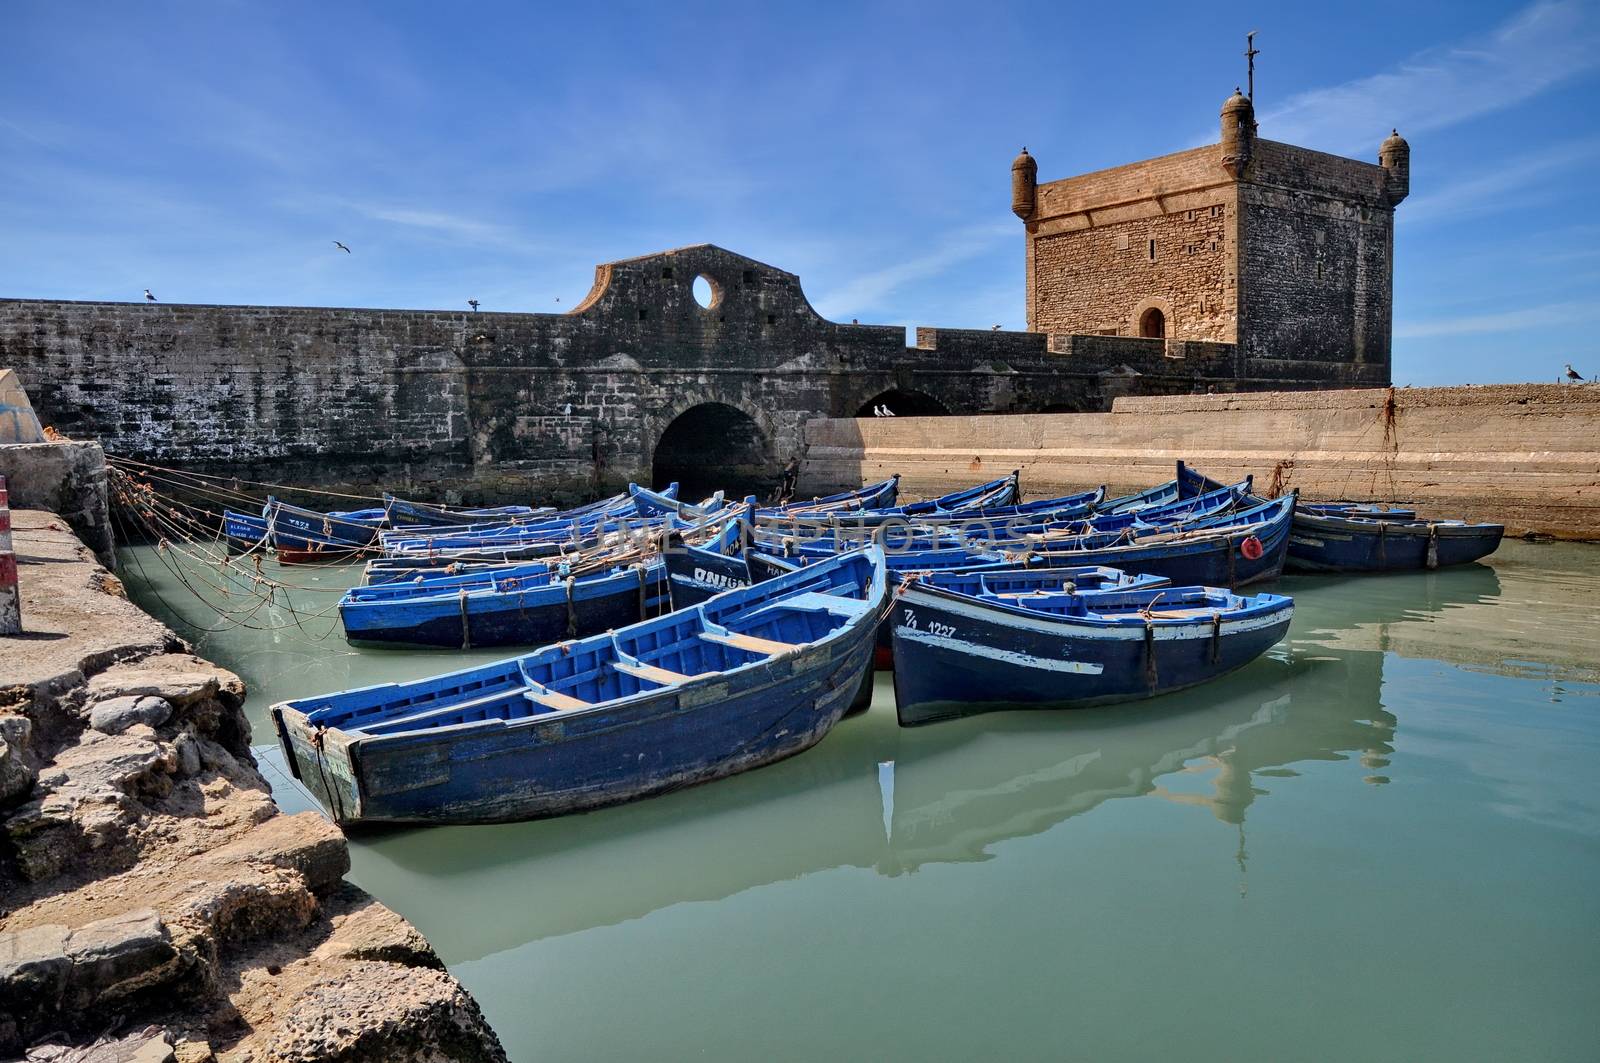 Blue boats of Essaouira in Morocco by anderm